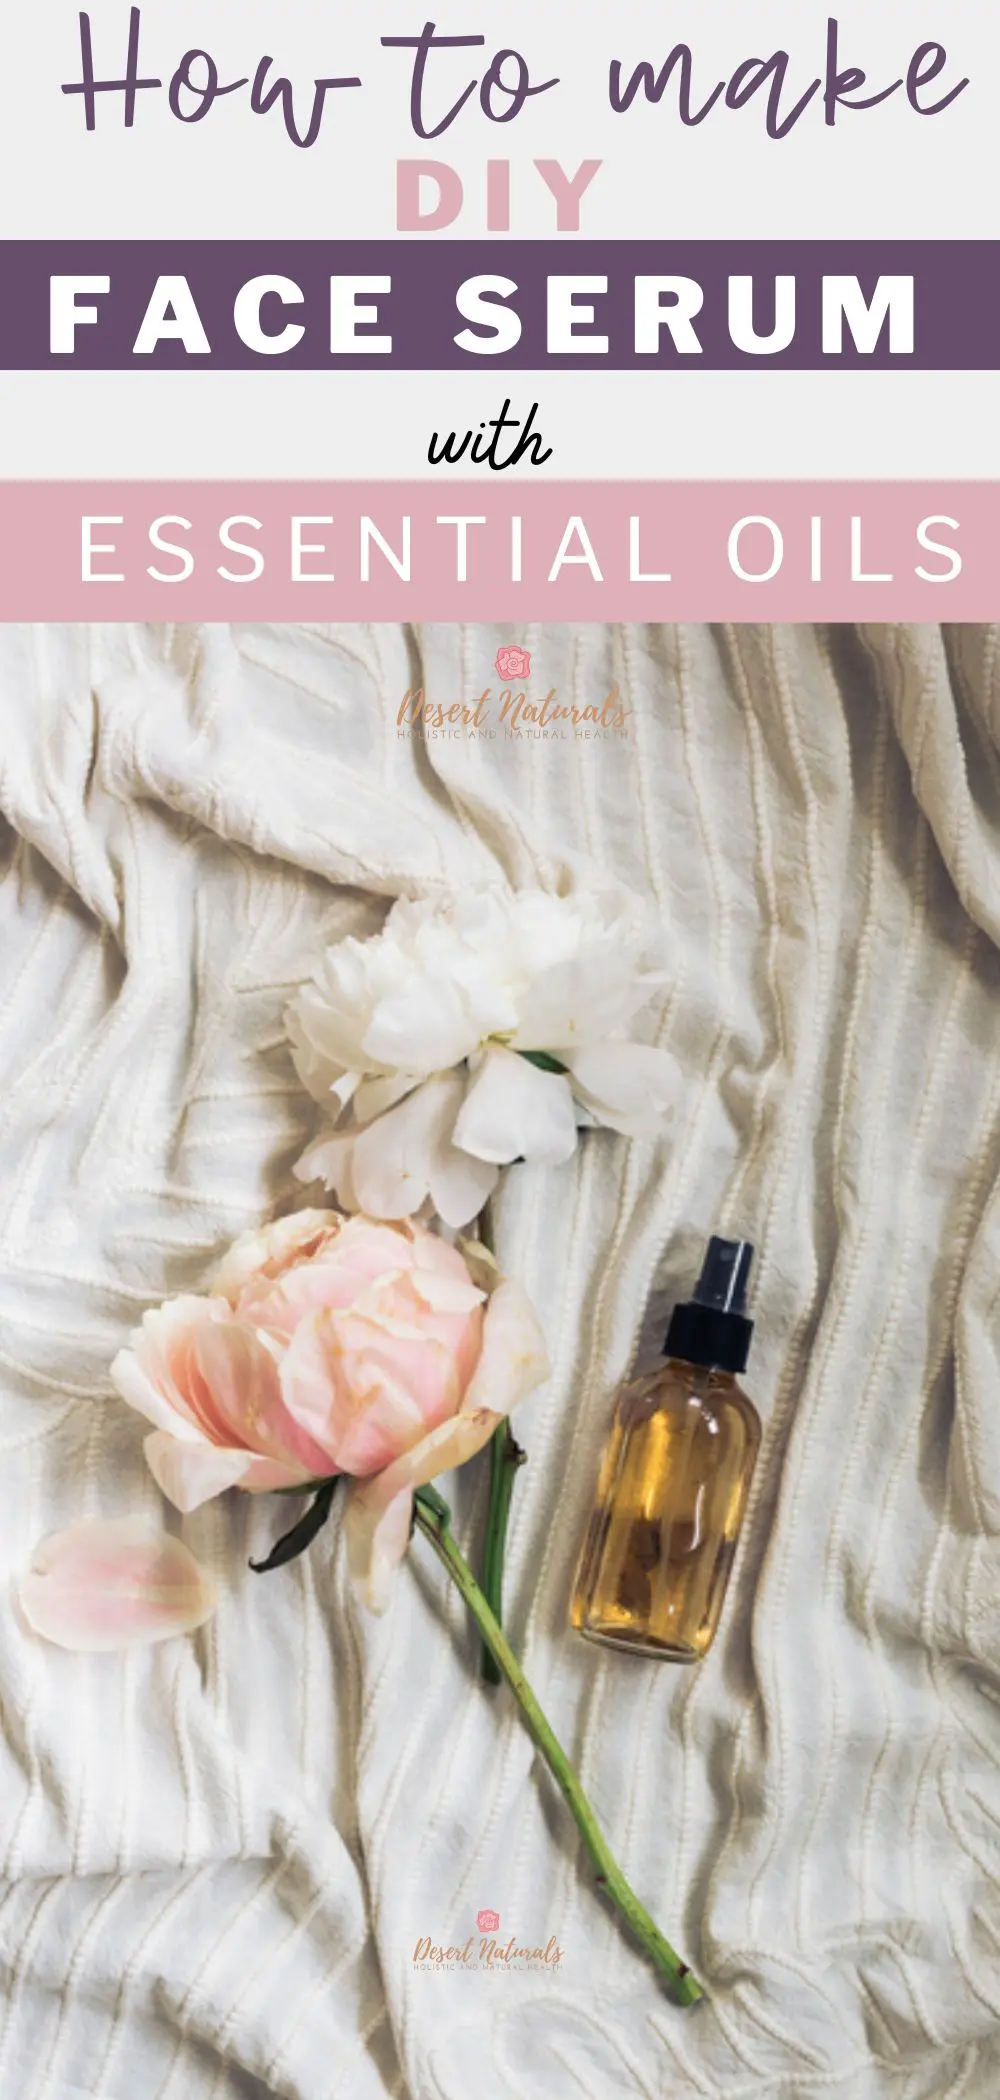 bottle of diy facial serum next to a rose with text diy face serum with essential oil